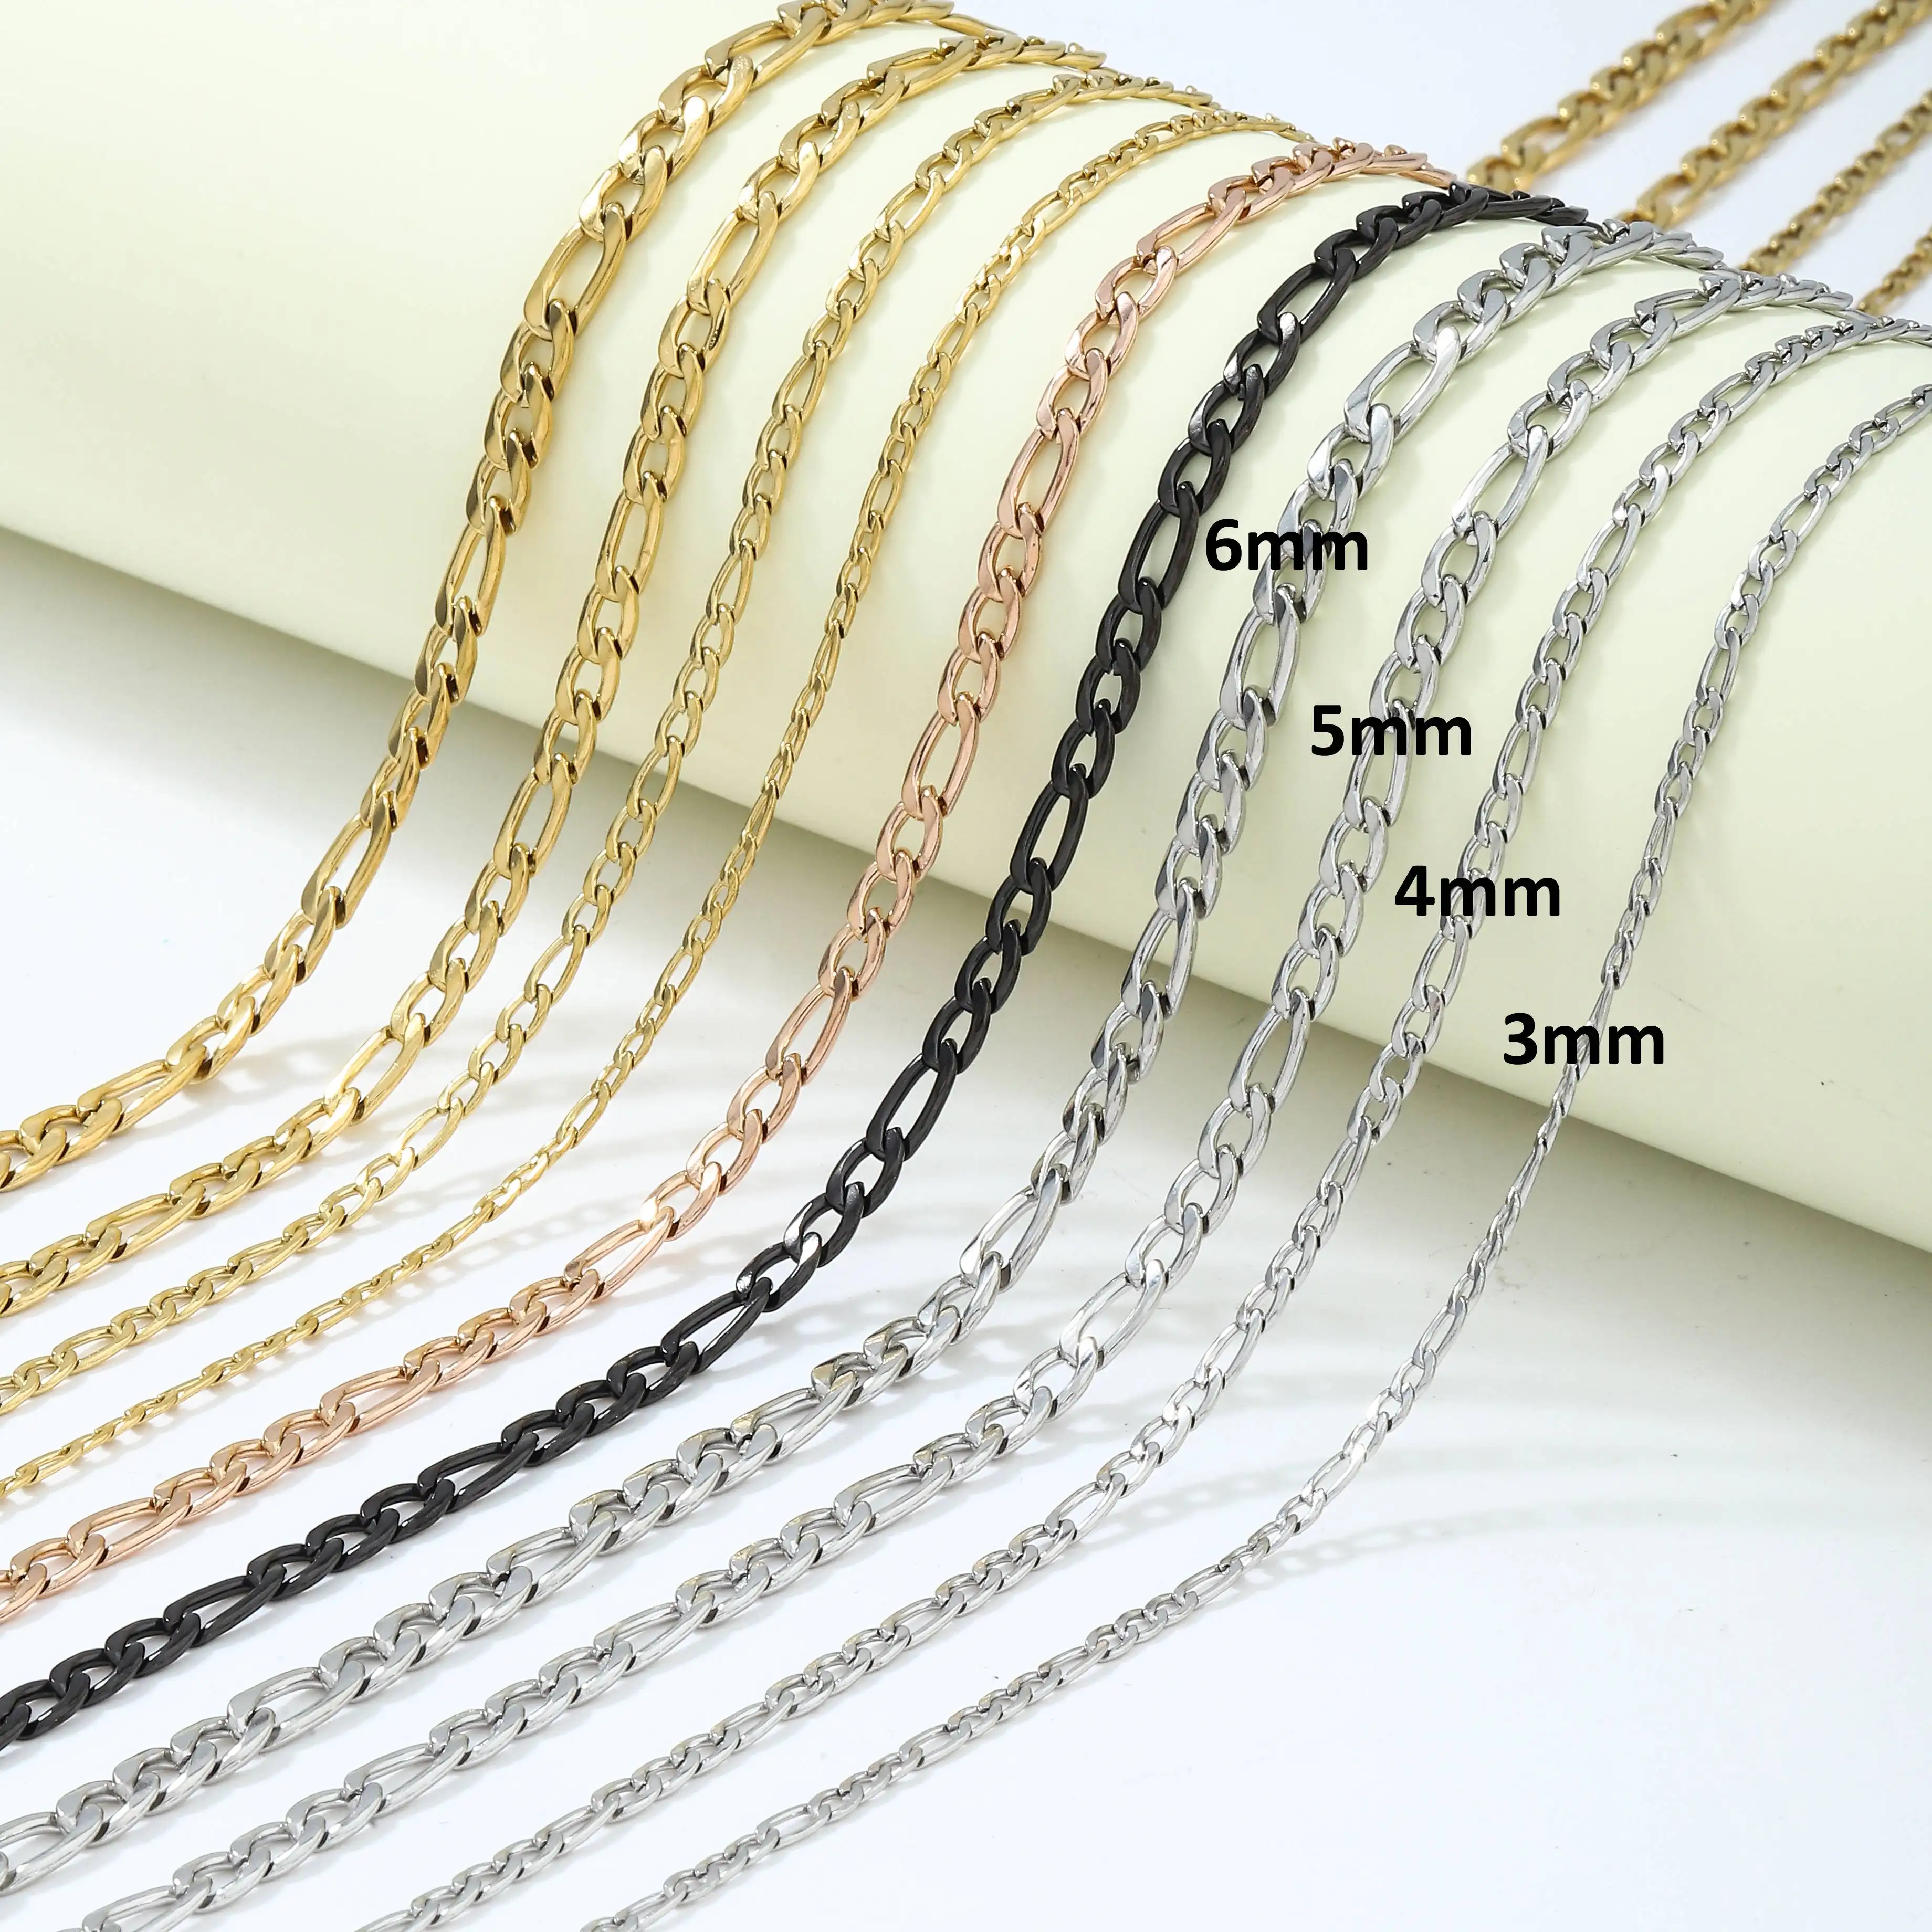 Ruigang Customized 3/3.8/5/6/7mm Silver Gold Figaro Chains Men Gold Chain 18K 24k Stainless Steel Chain Necklace For Men Women